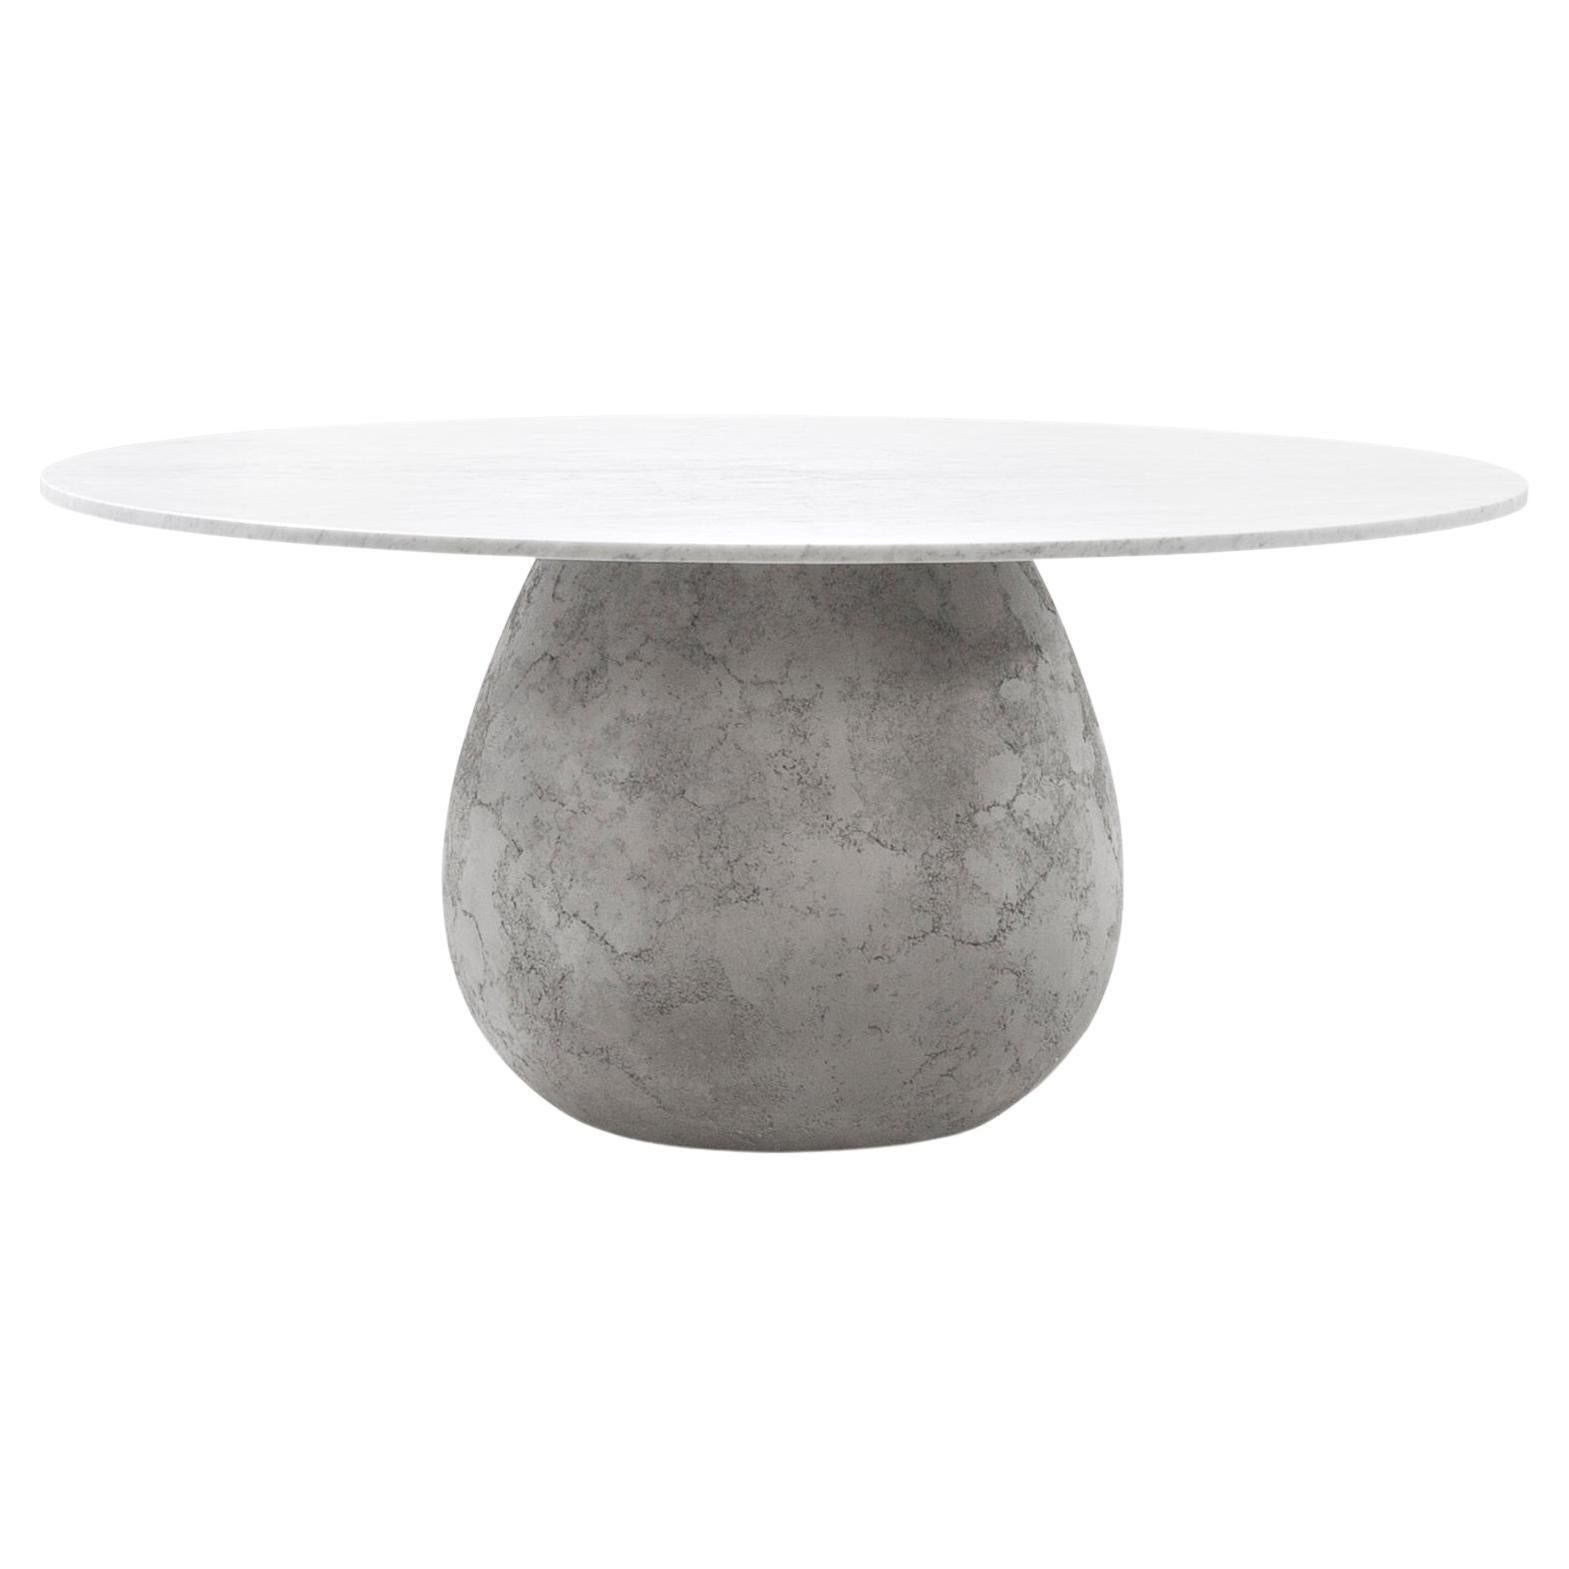 Gervasoni Next 232 Table with Concrete Base & Carrara Marble Top by Paola Navone